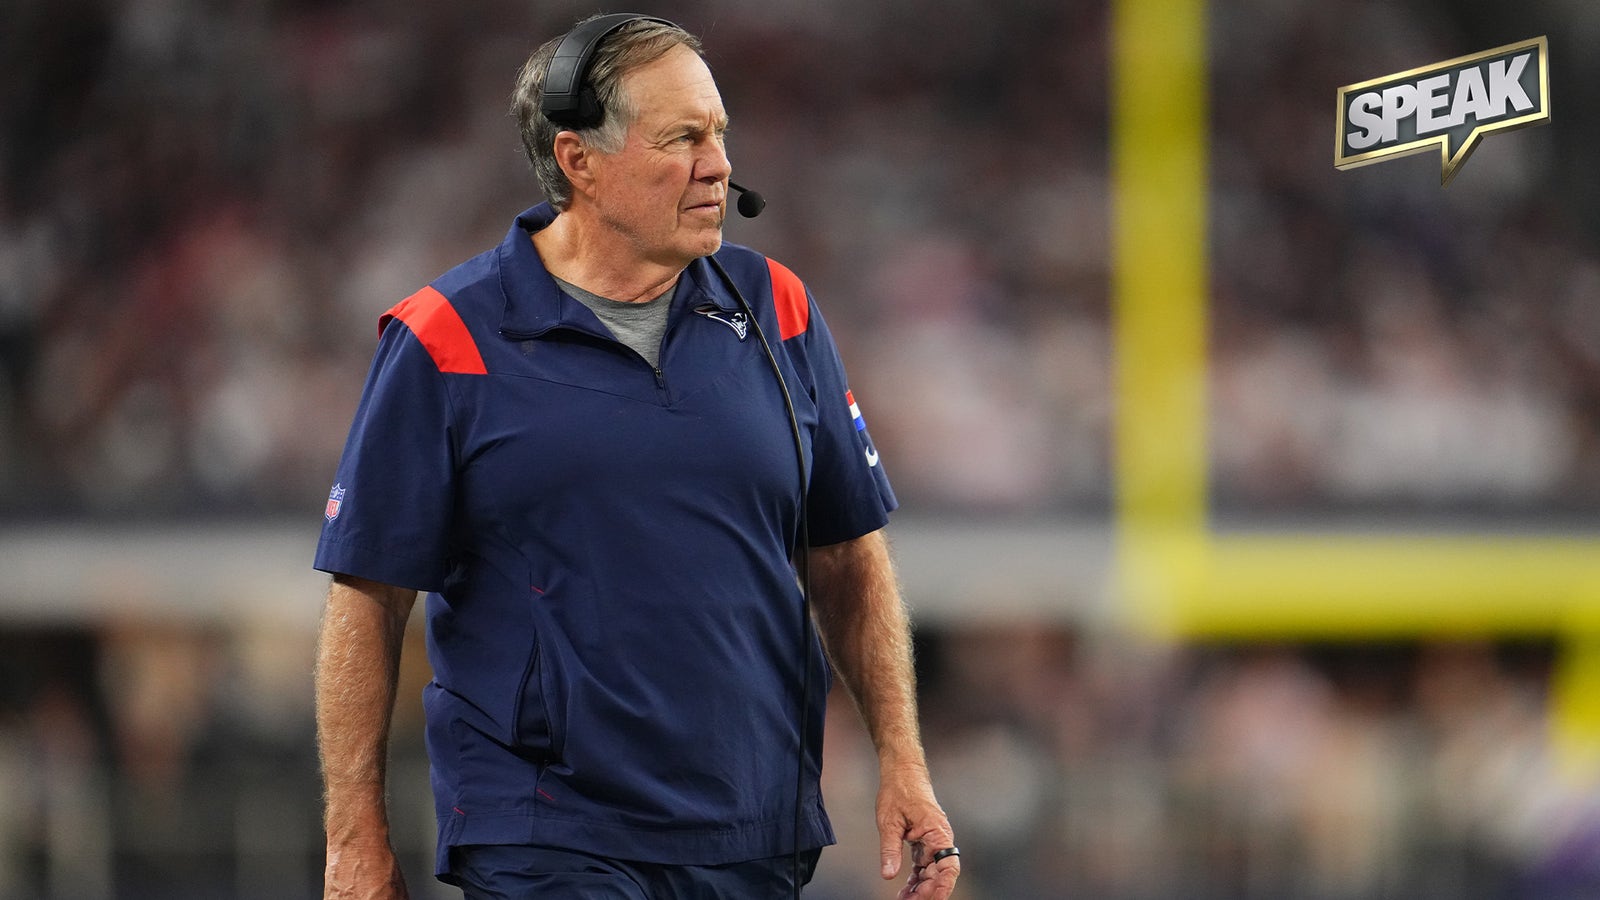 Has Bill Belichick's legacy taken a hit with Patriots ongoing struggles?